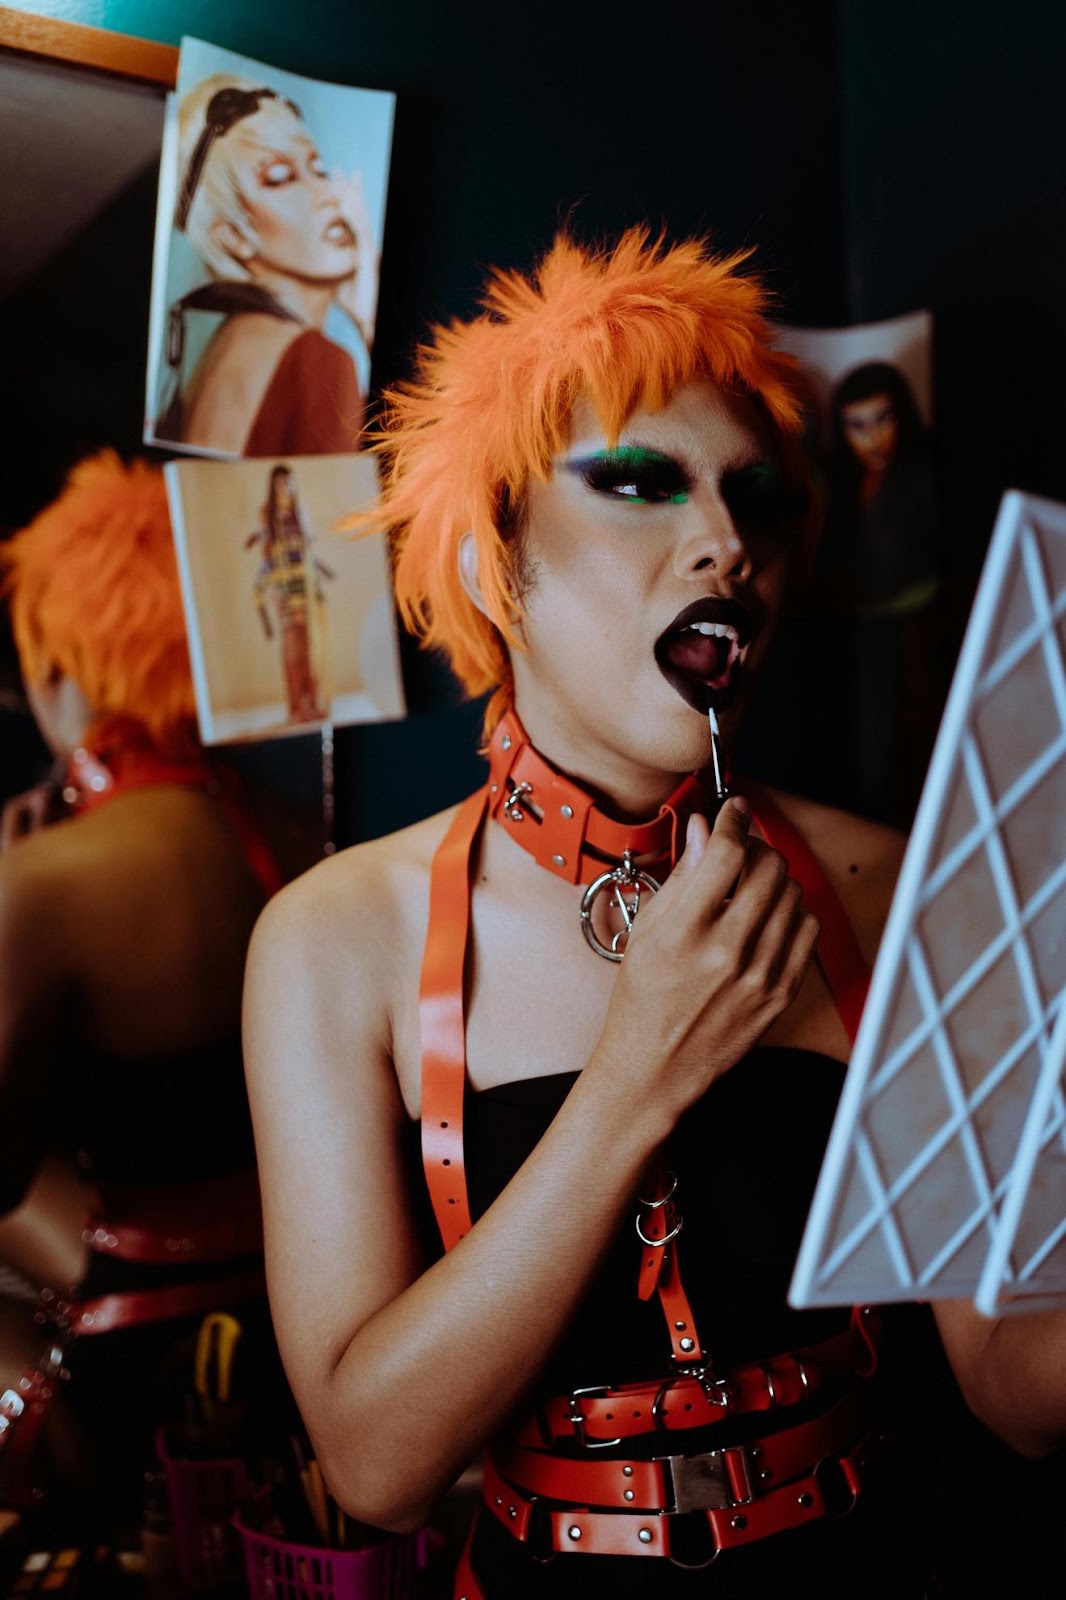 A person with orange hair and black makeup

Description automatically generated